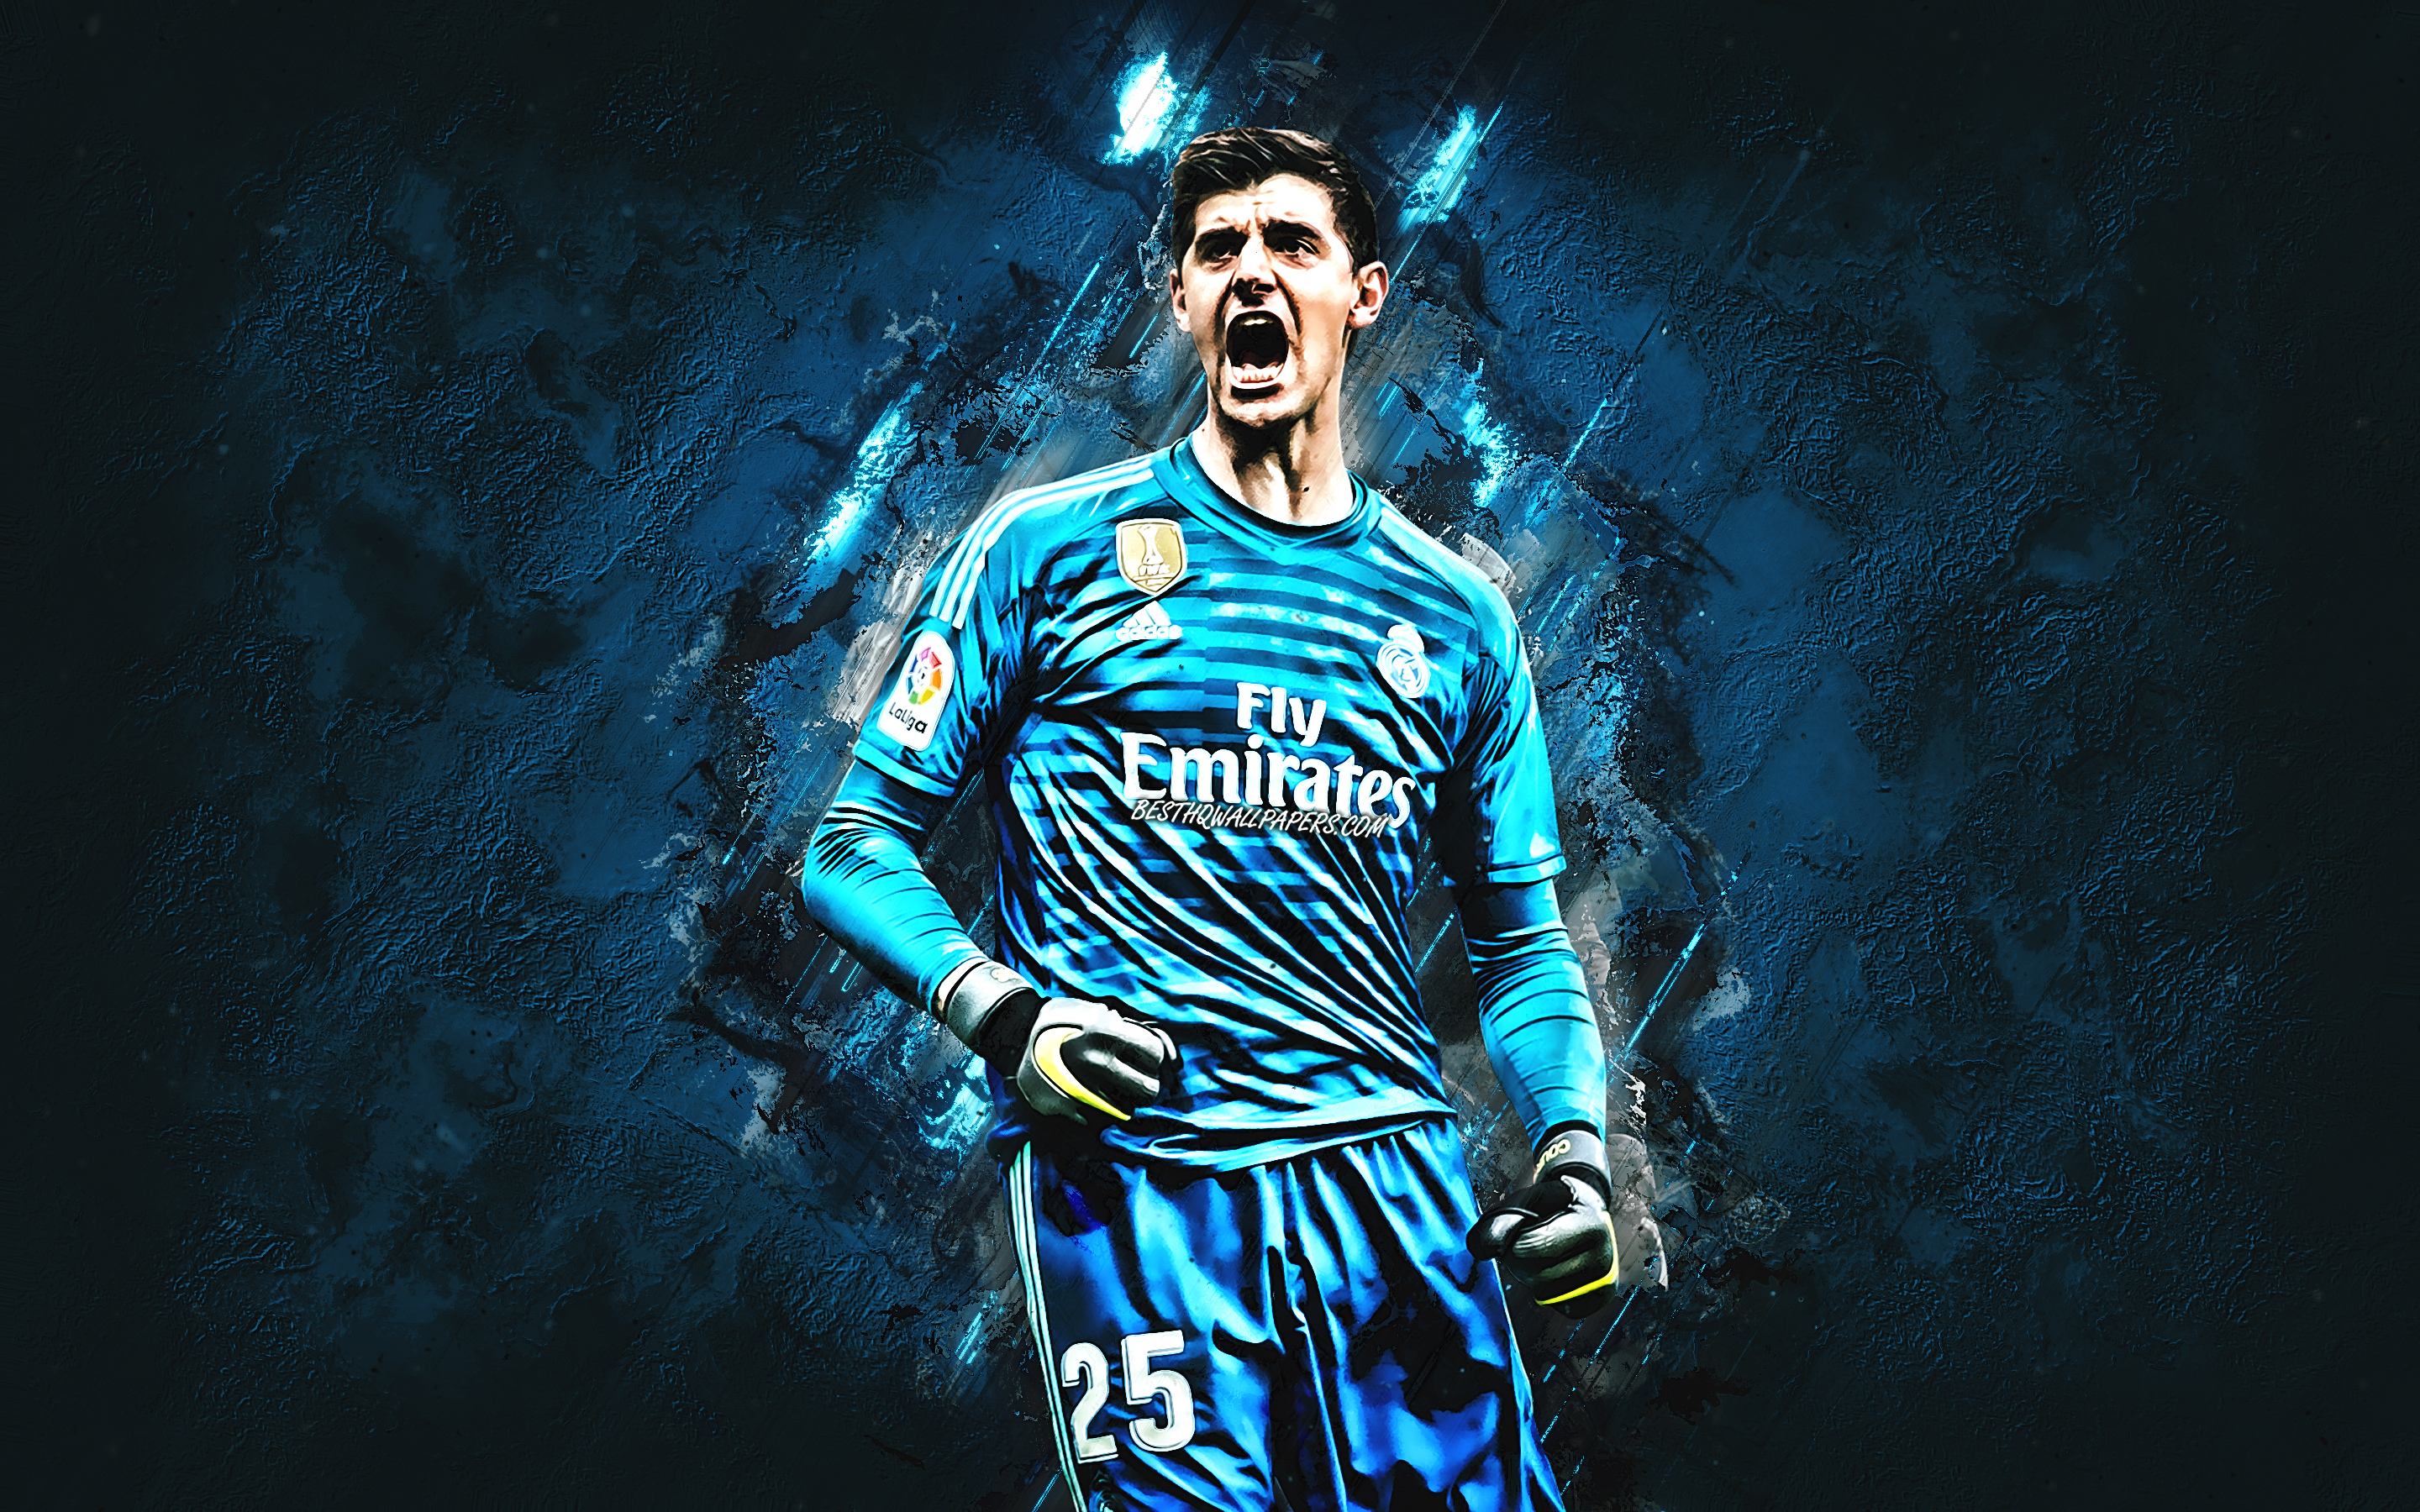 Download wallpaper Thibaut Courtois, Real Madrid, Belgian soccer player, goalkeeper, portrait, art, blue stone background, La Liga, Spain for desktop with resolution 2880x1800. High Quality HD picture wallpaper